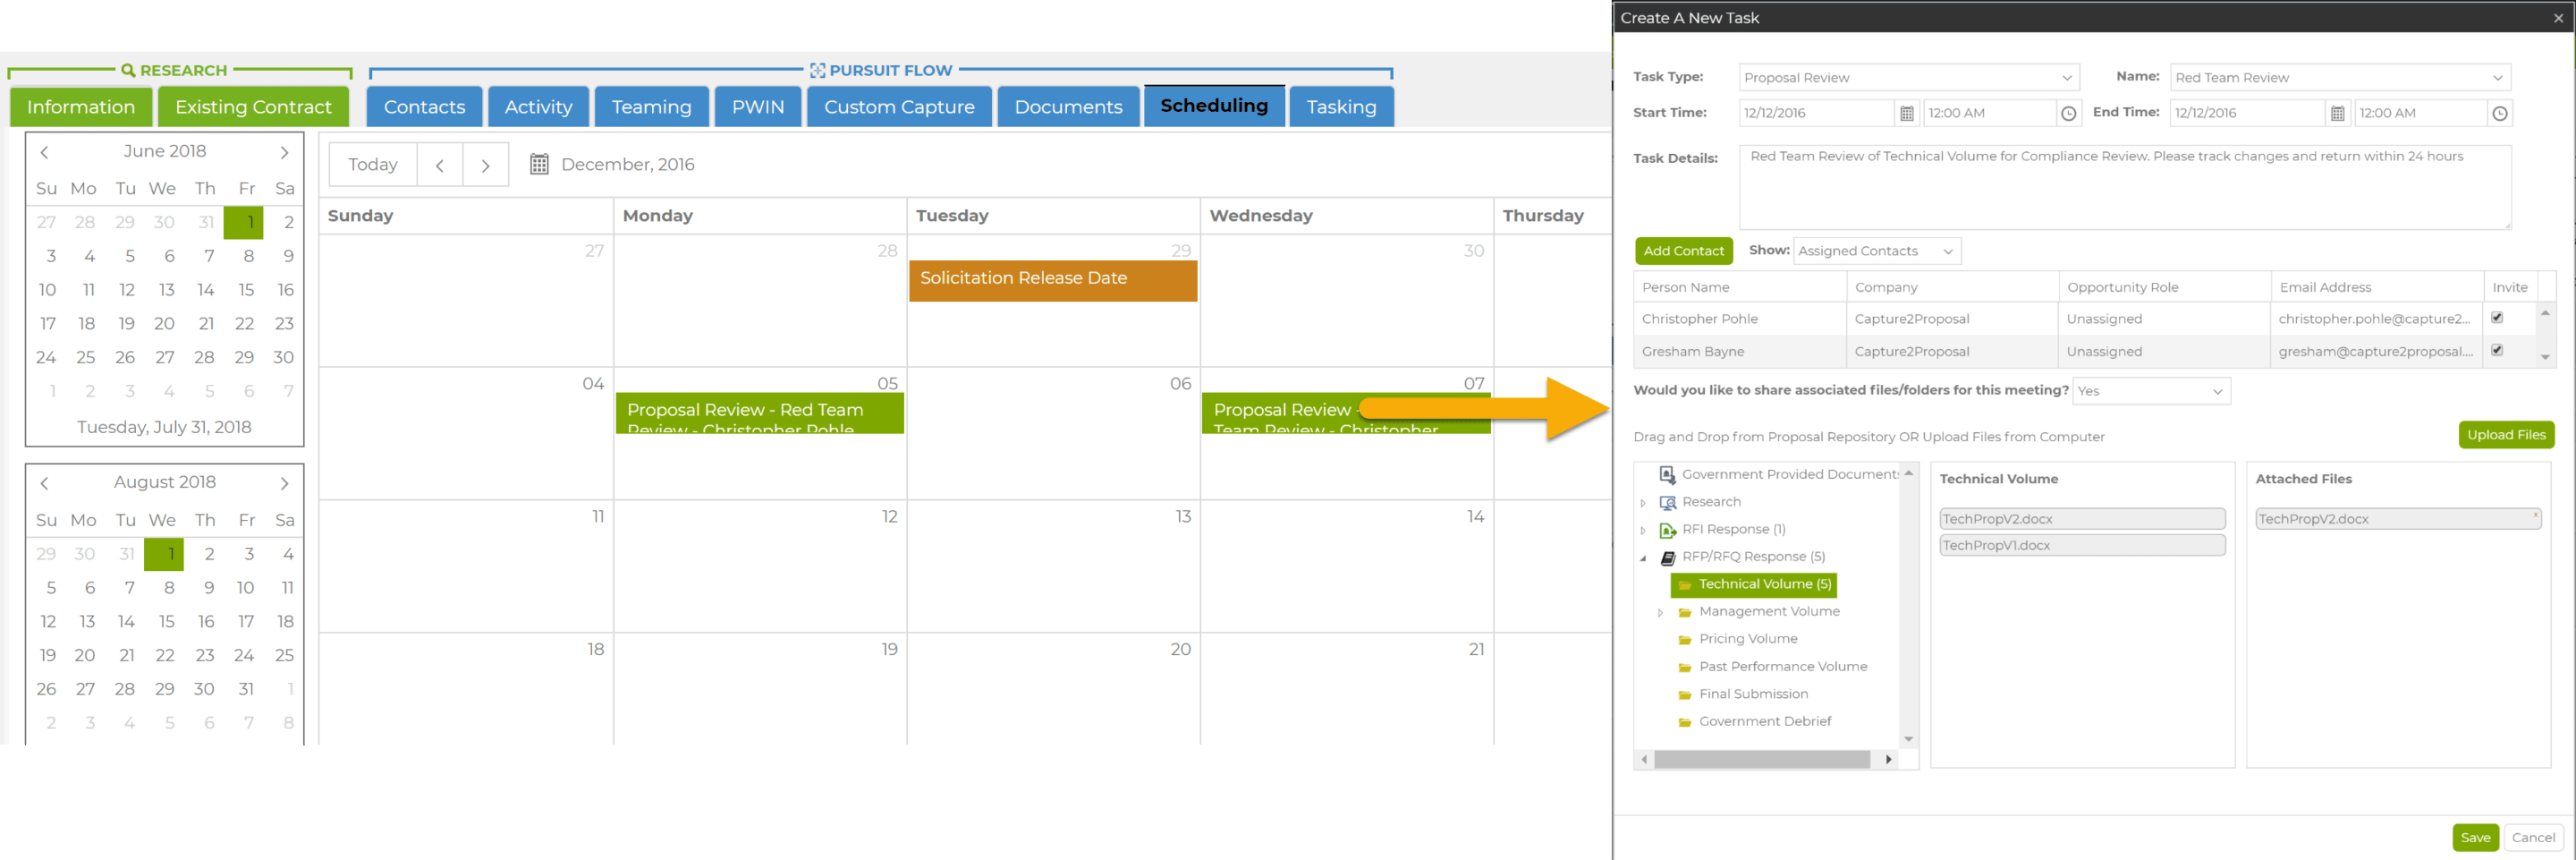 Creating a New Task in Capture2s Schedule Management Feature